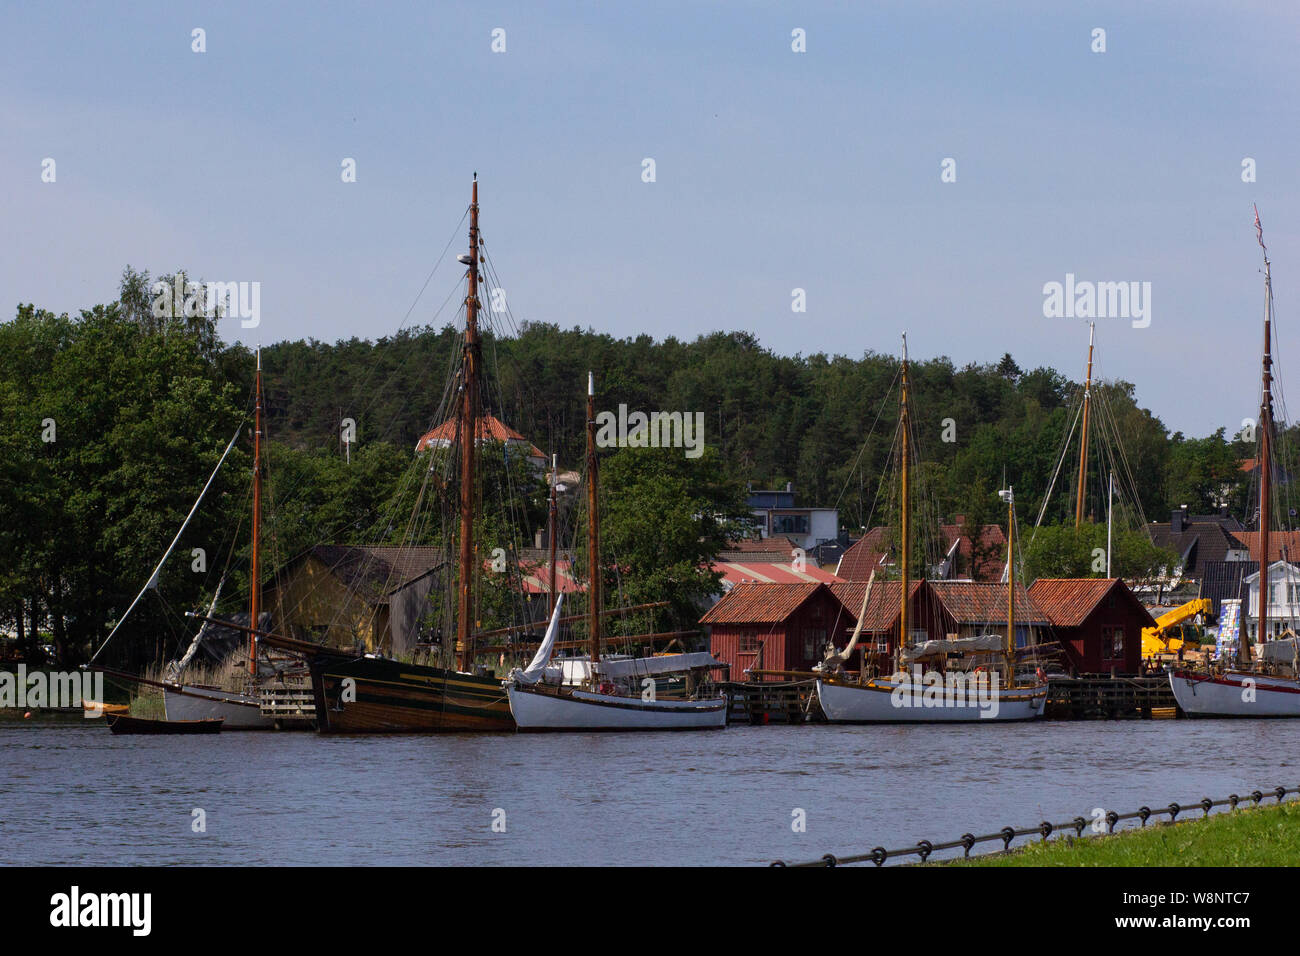 Ships on the river Glomma in Fredrikstad city Norway Stock Photo